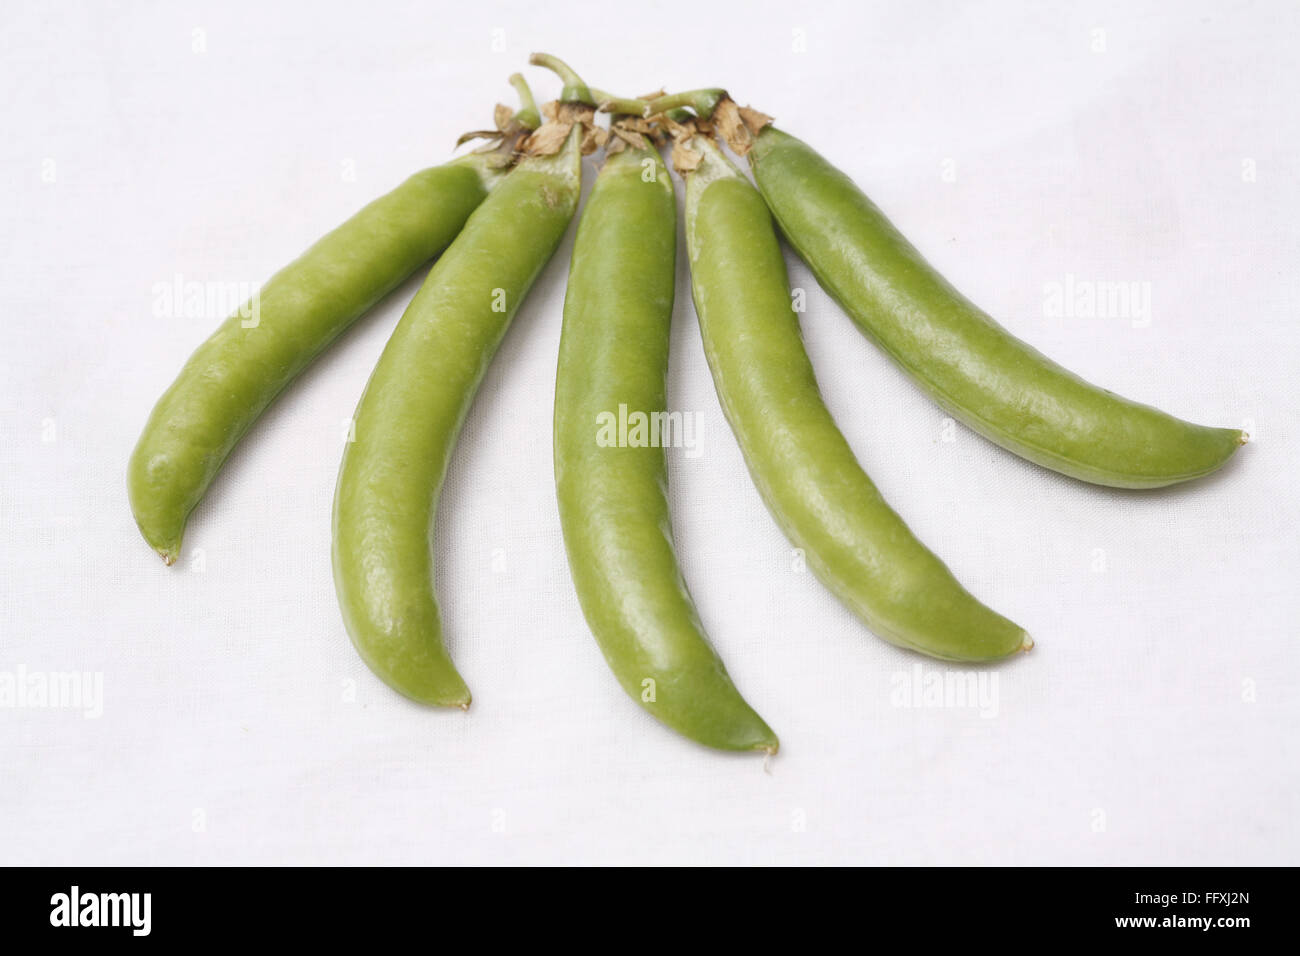 Vegetable , Green Pea pods Pisum sativum arranged as five fingers of hand on white background Stock Photo